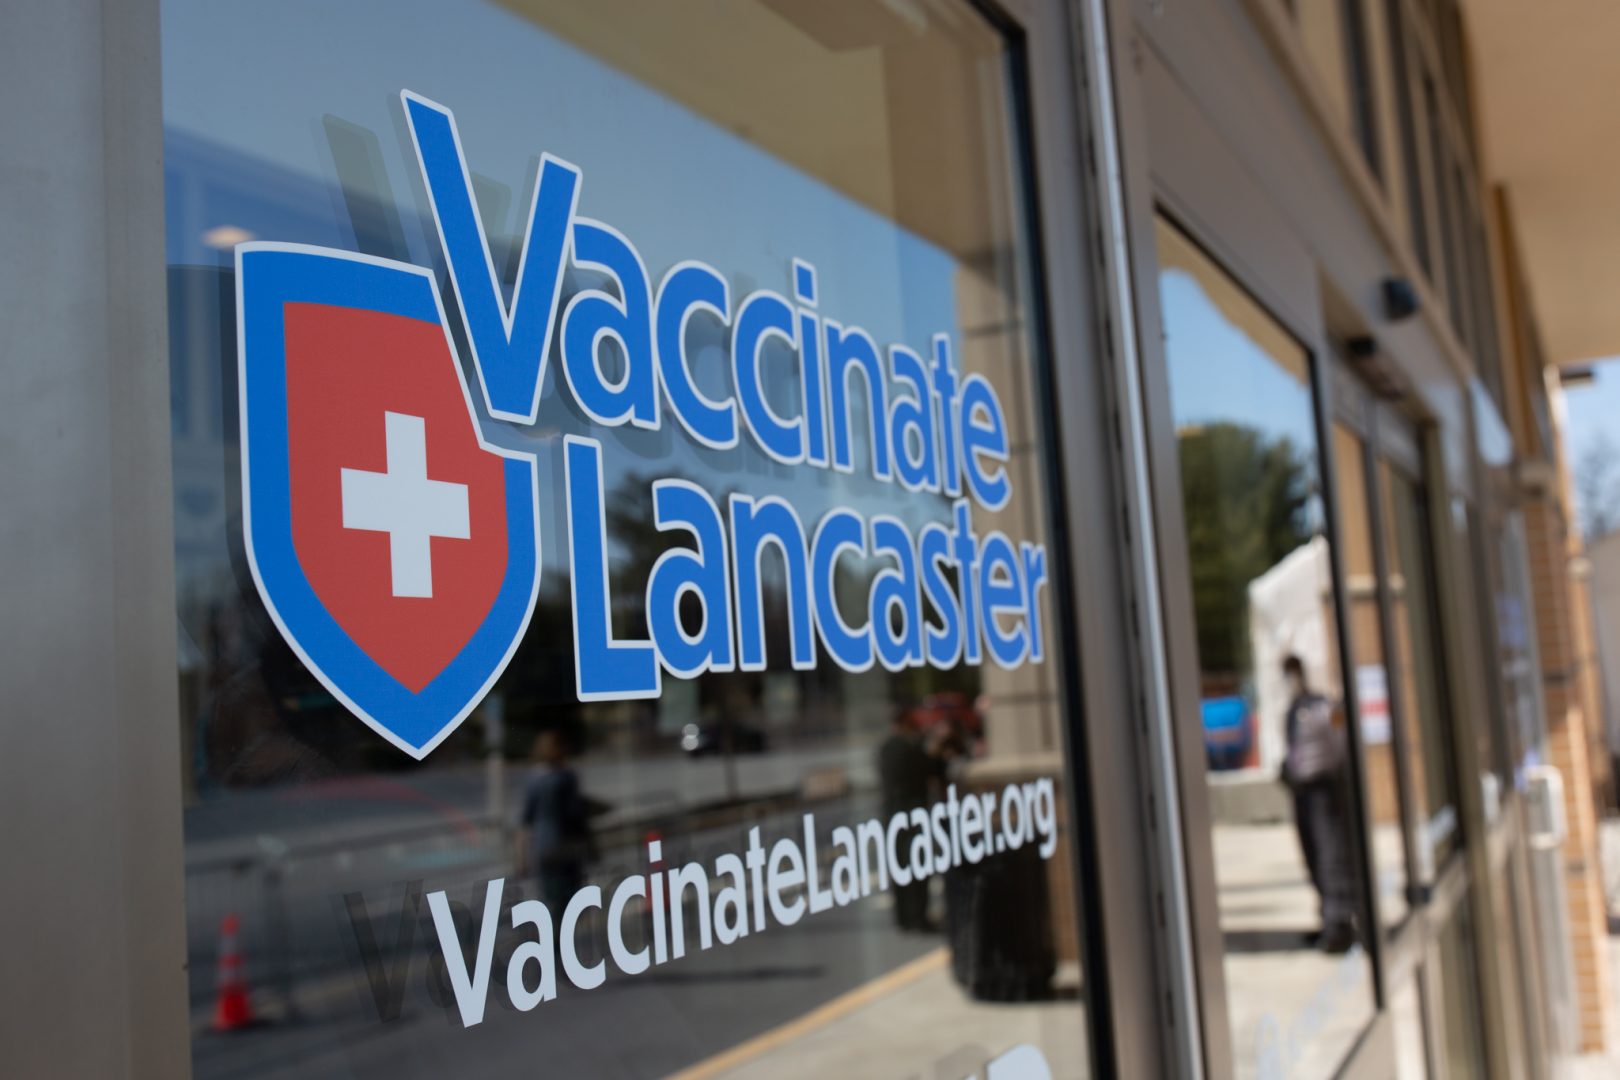 The mass vaccination site at Park City Center in Lancaster opened on March 10, 2021.